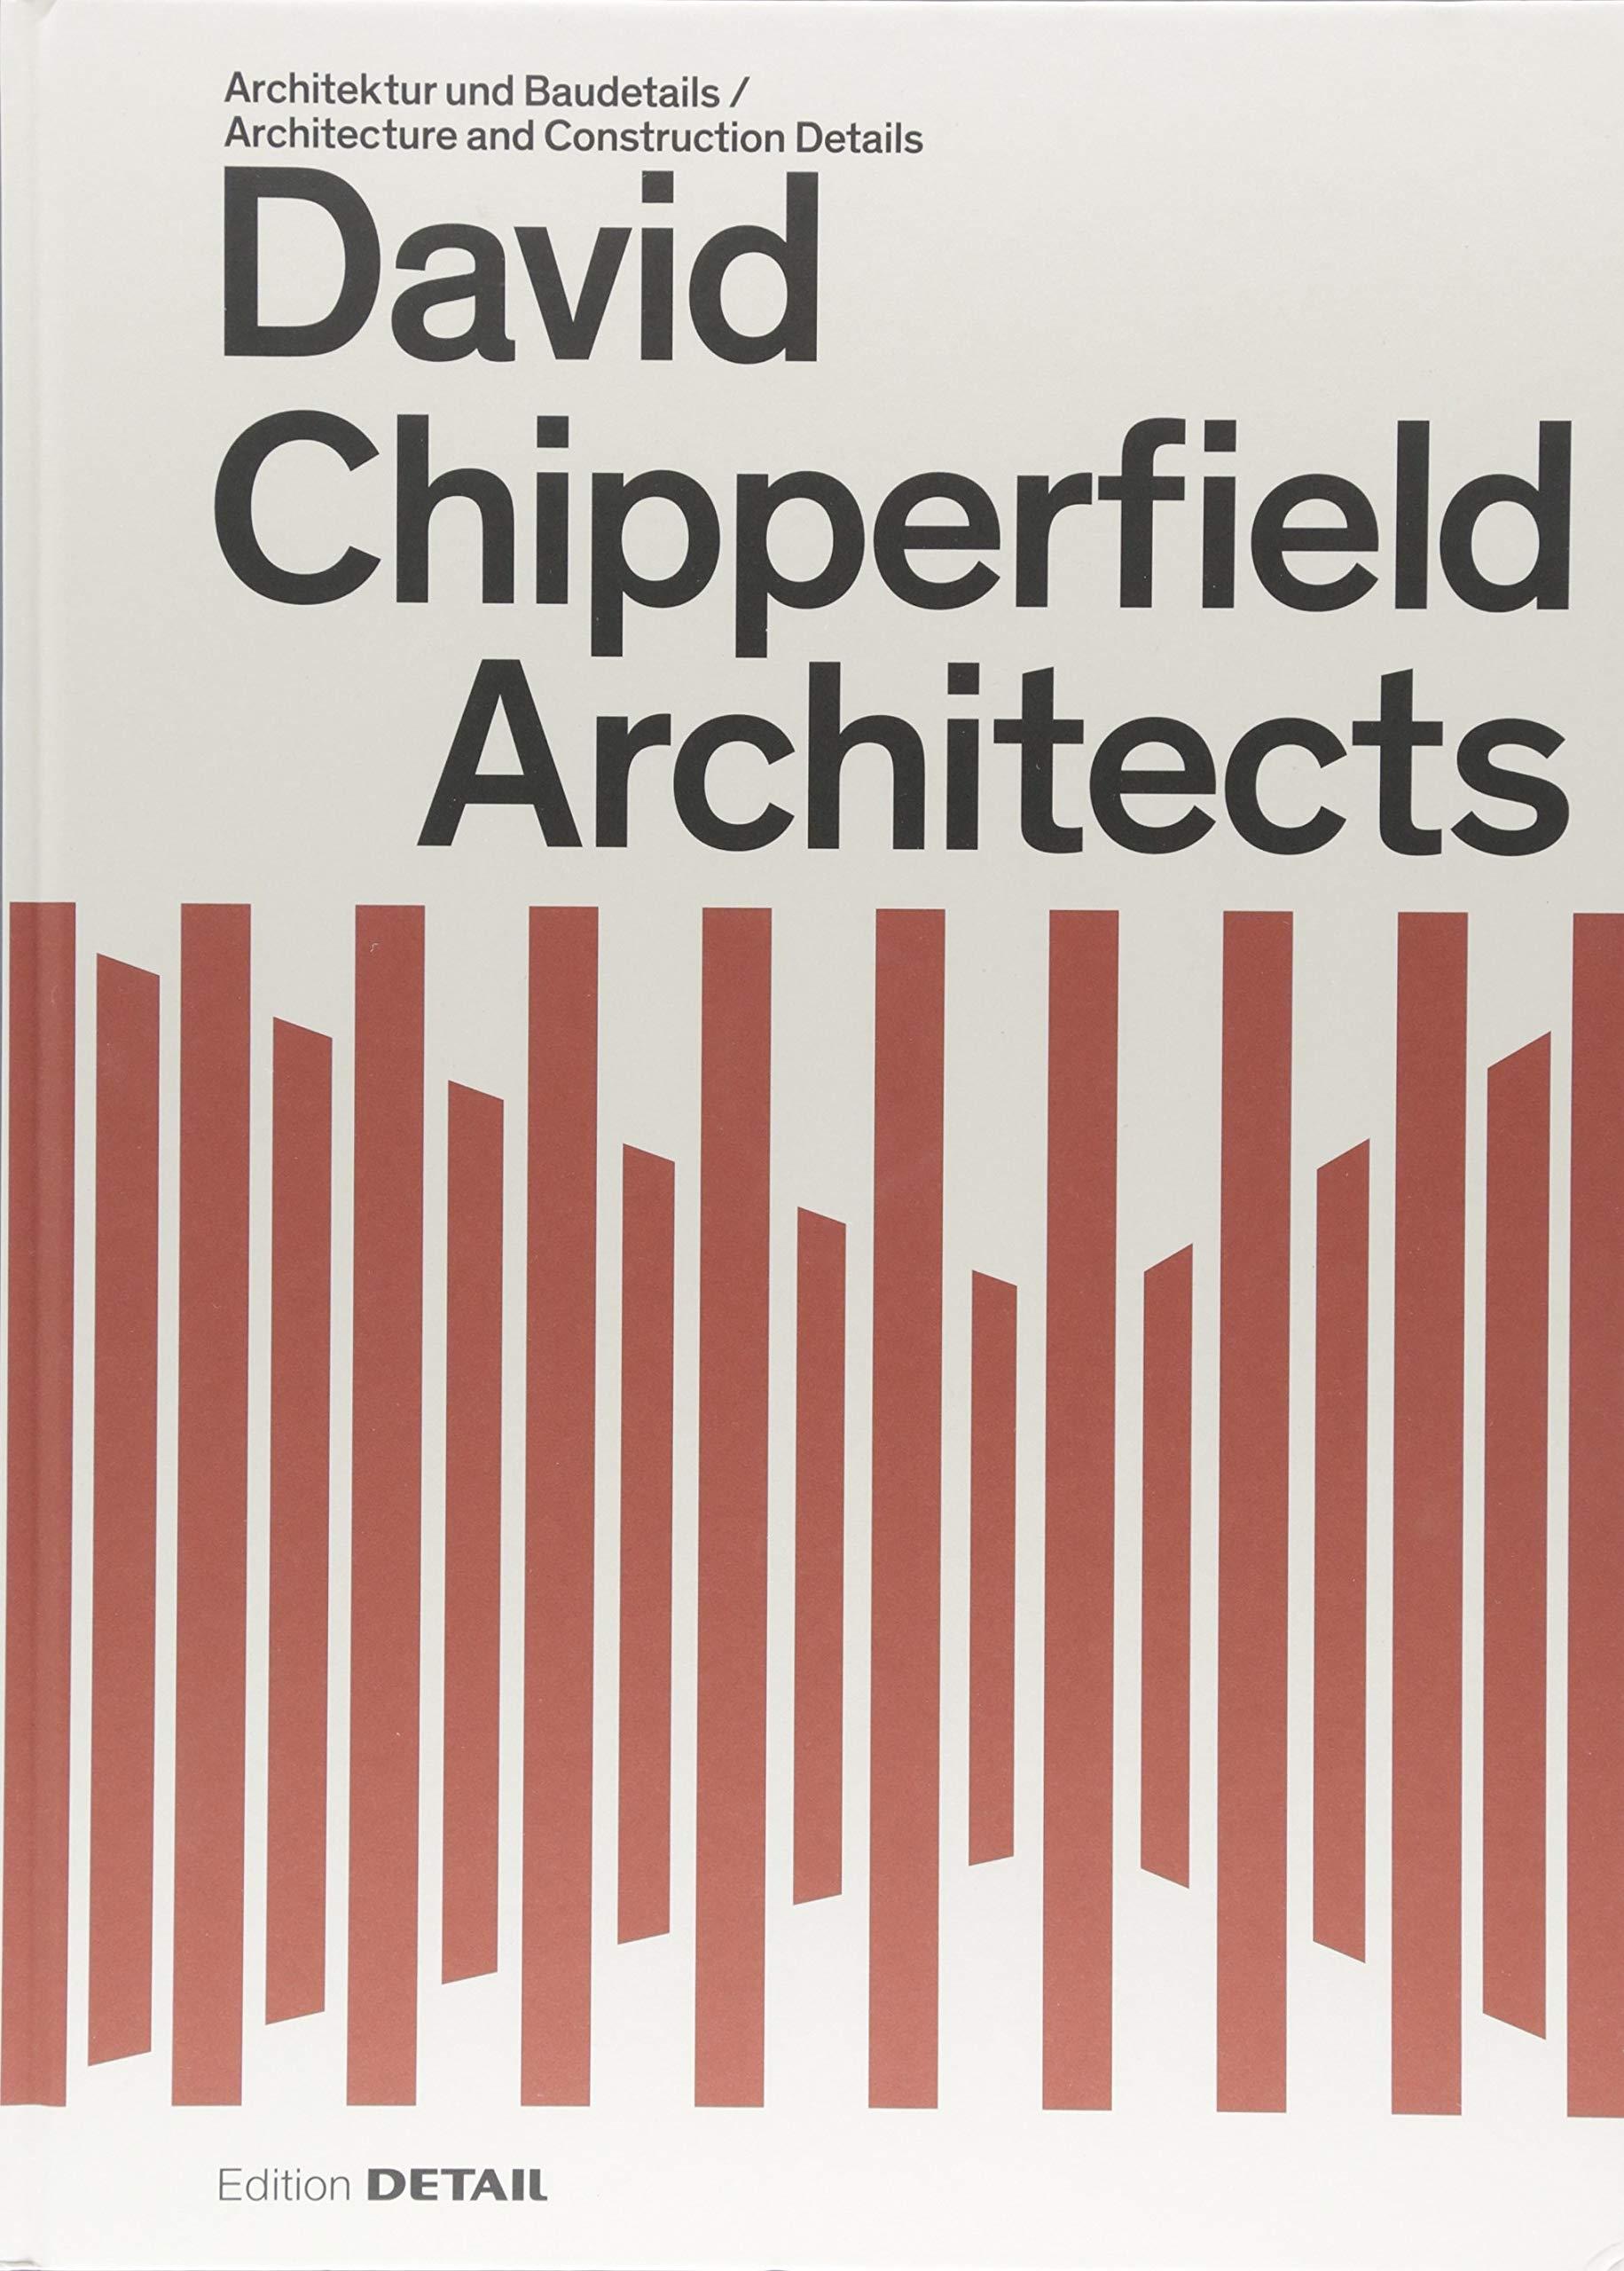 CHIPPERFIELD: DAVID CHIPPERFIELD ARCHITECTS. DETAIL